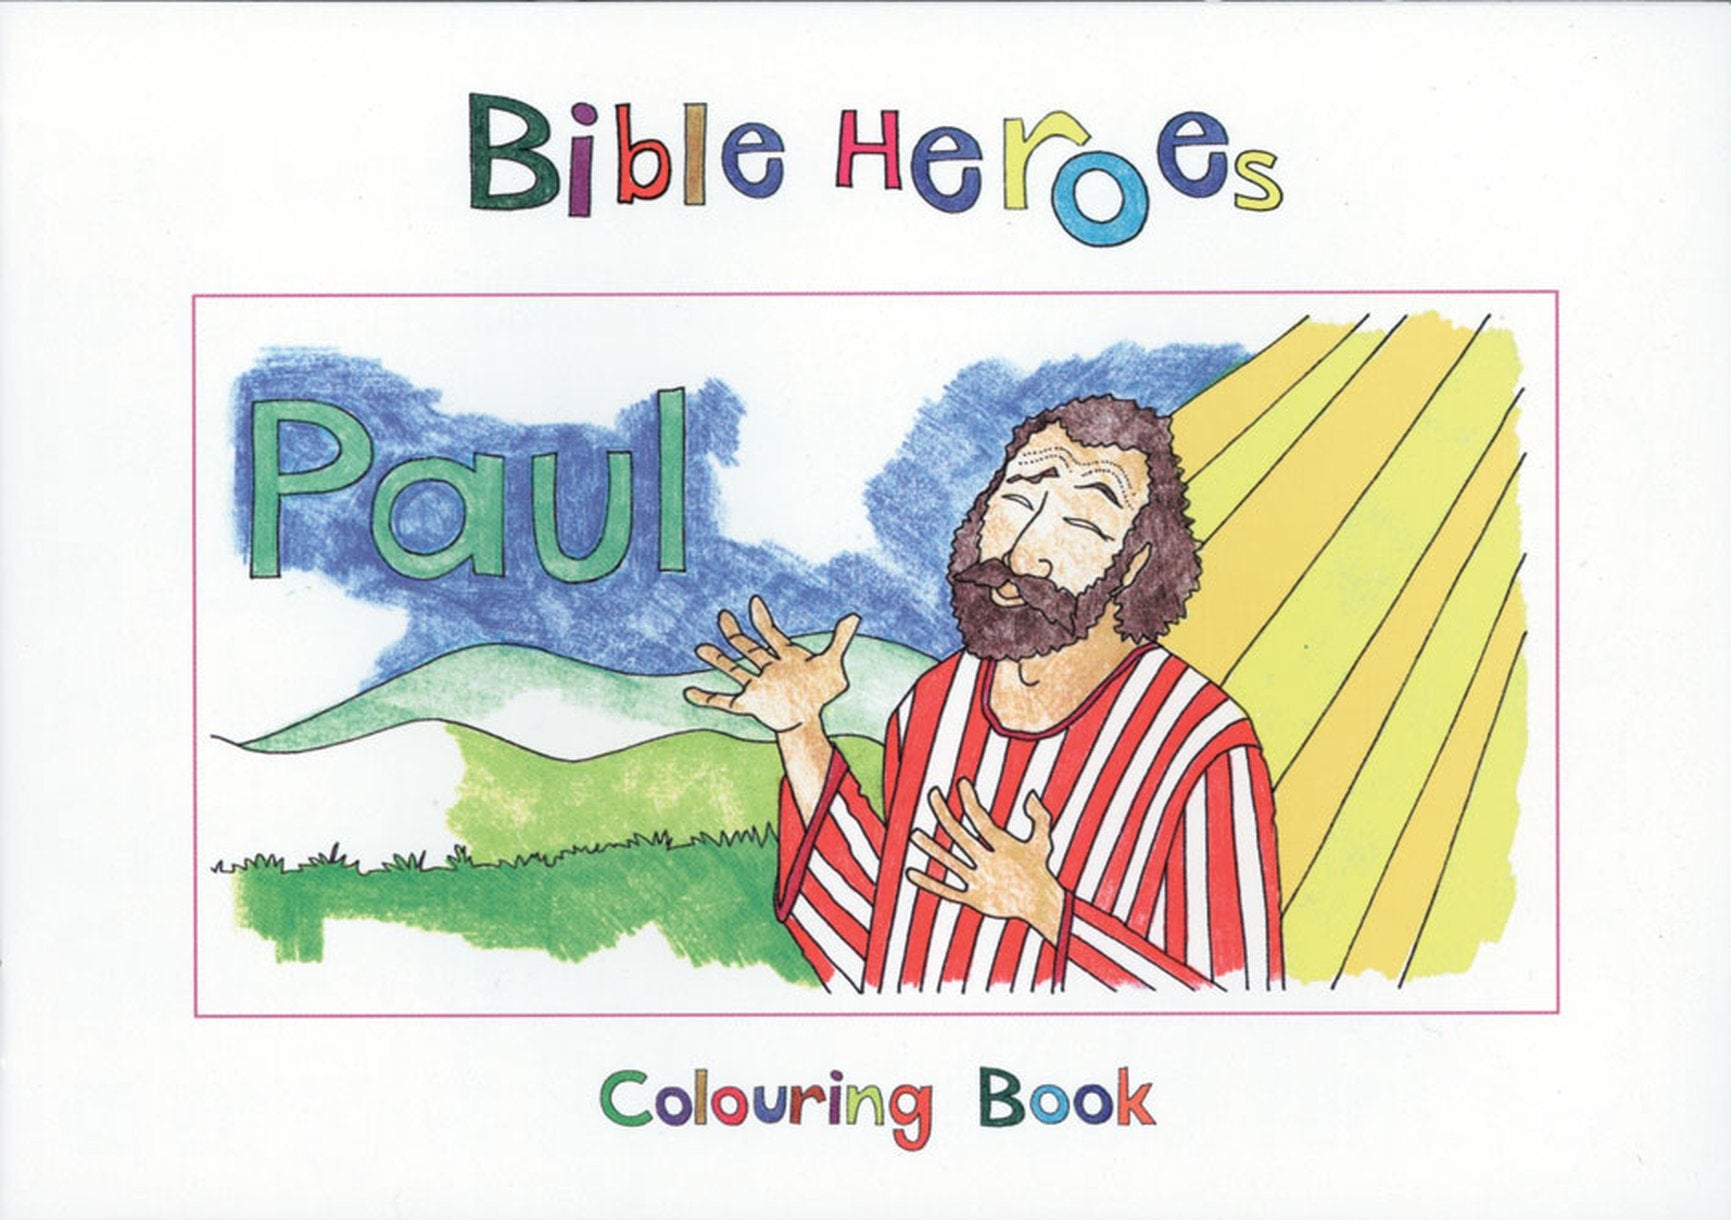 Image of Bible Heroes - Paul other